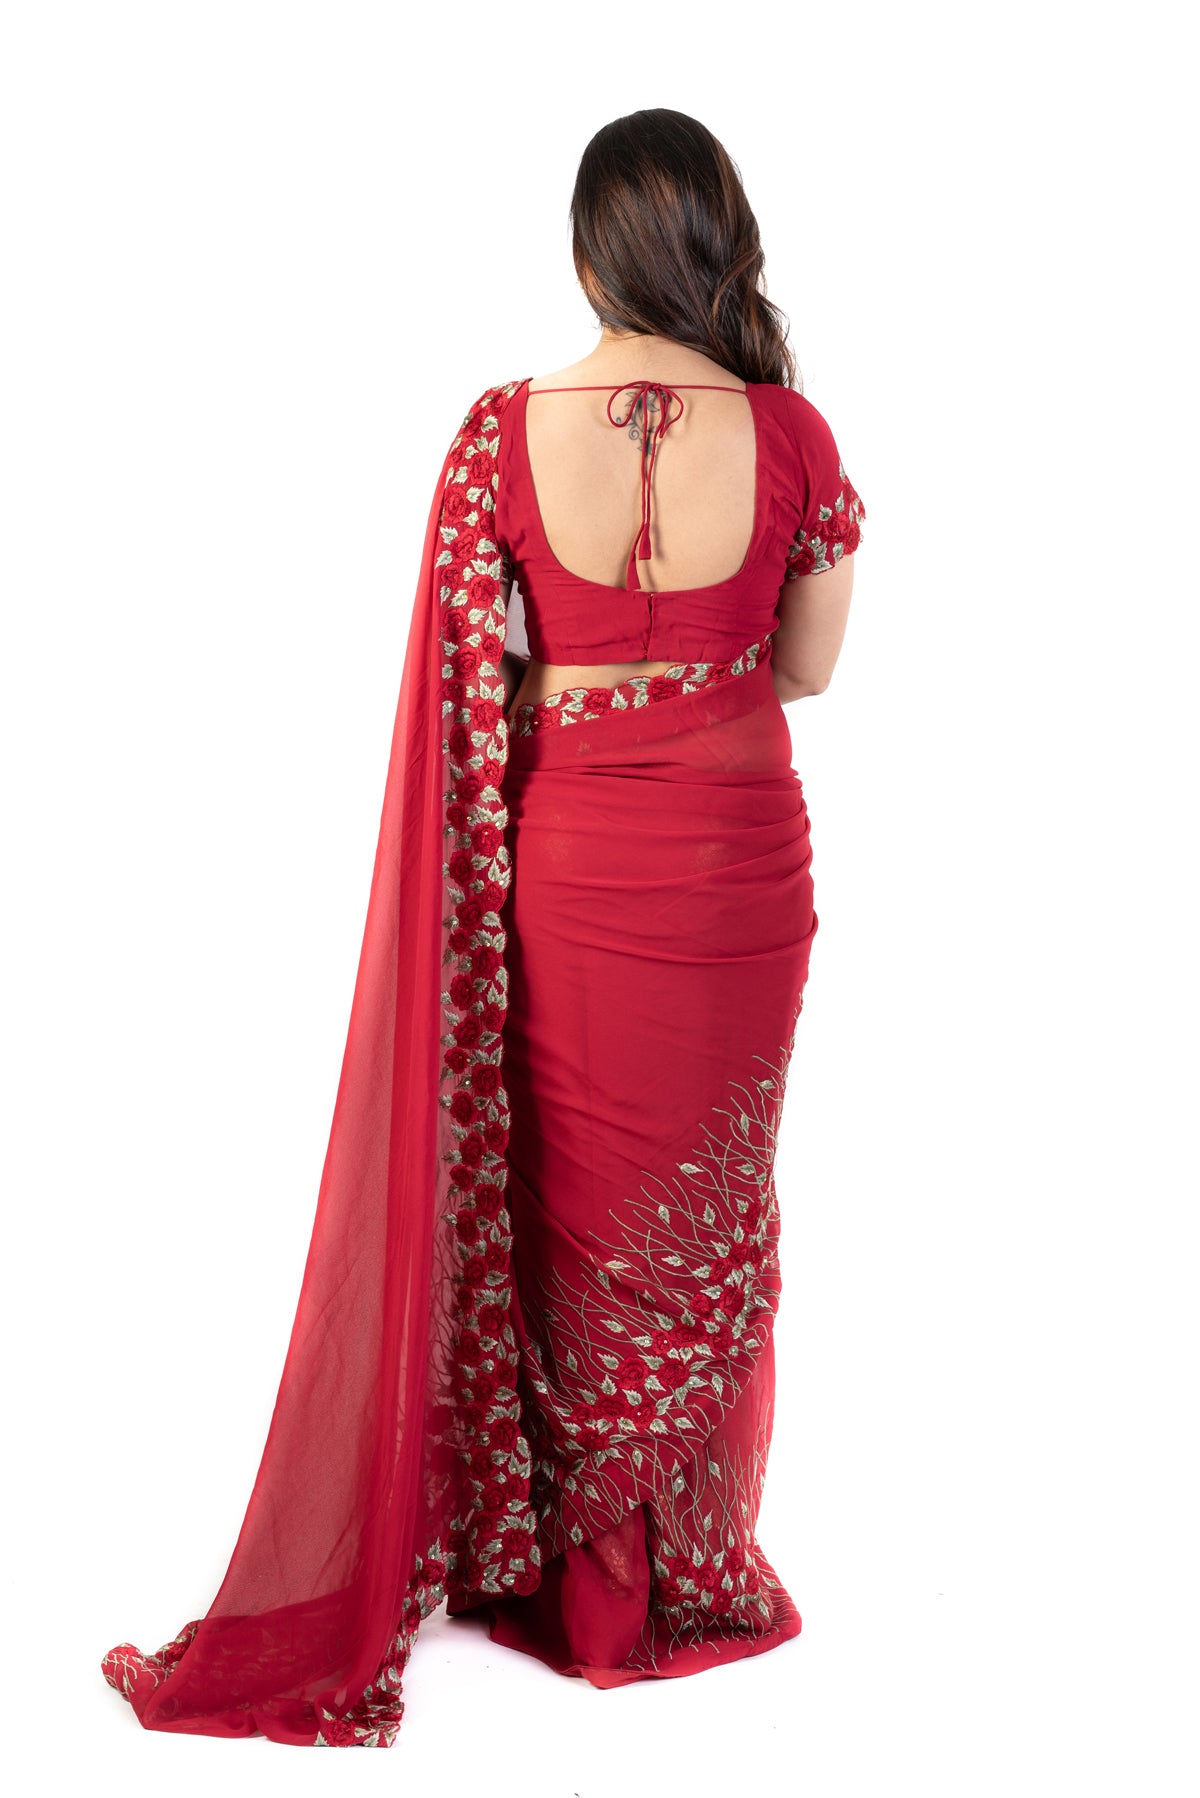 Red Saree With Embroidered Roses